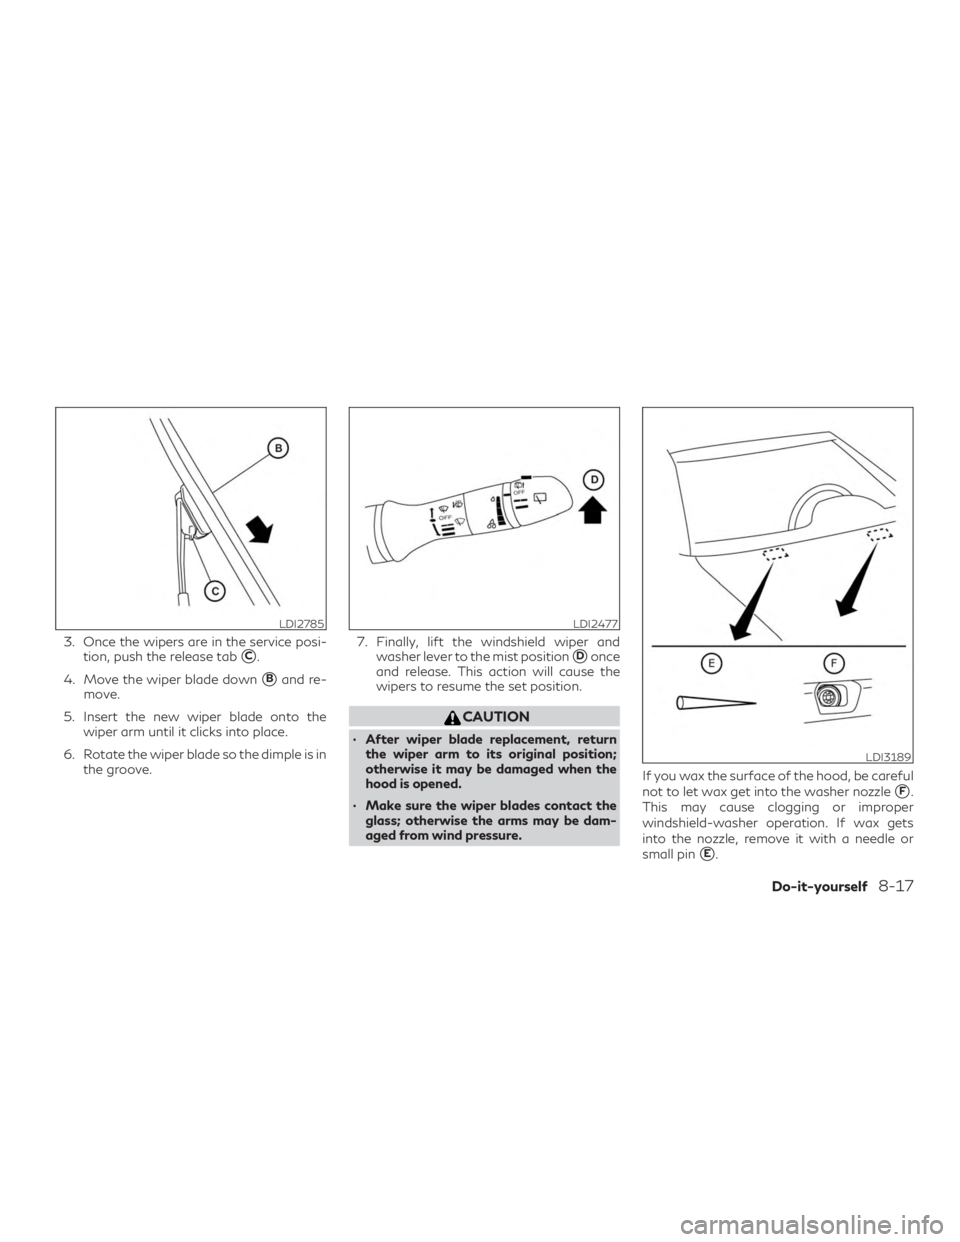 INFINITI QX50 2019  Owners Manual 3. Once the wipers are in the service posi-tion, push the release tab
C.
4. Move the wiper blade down
Band re-
move.
5. Insert the new wiper blade onto the wiper arm until it clicks into place.
6. R